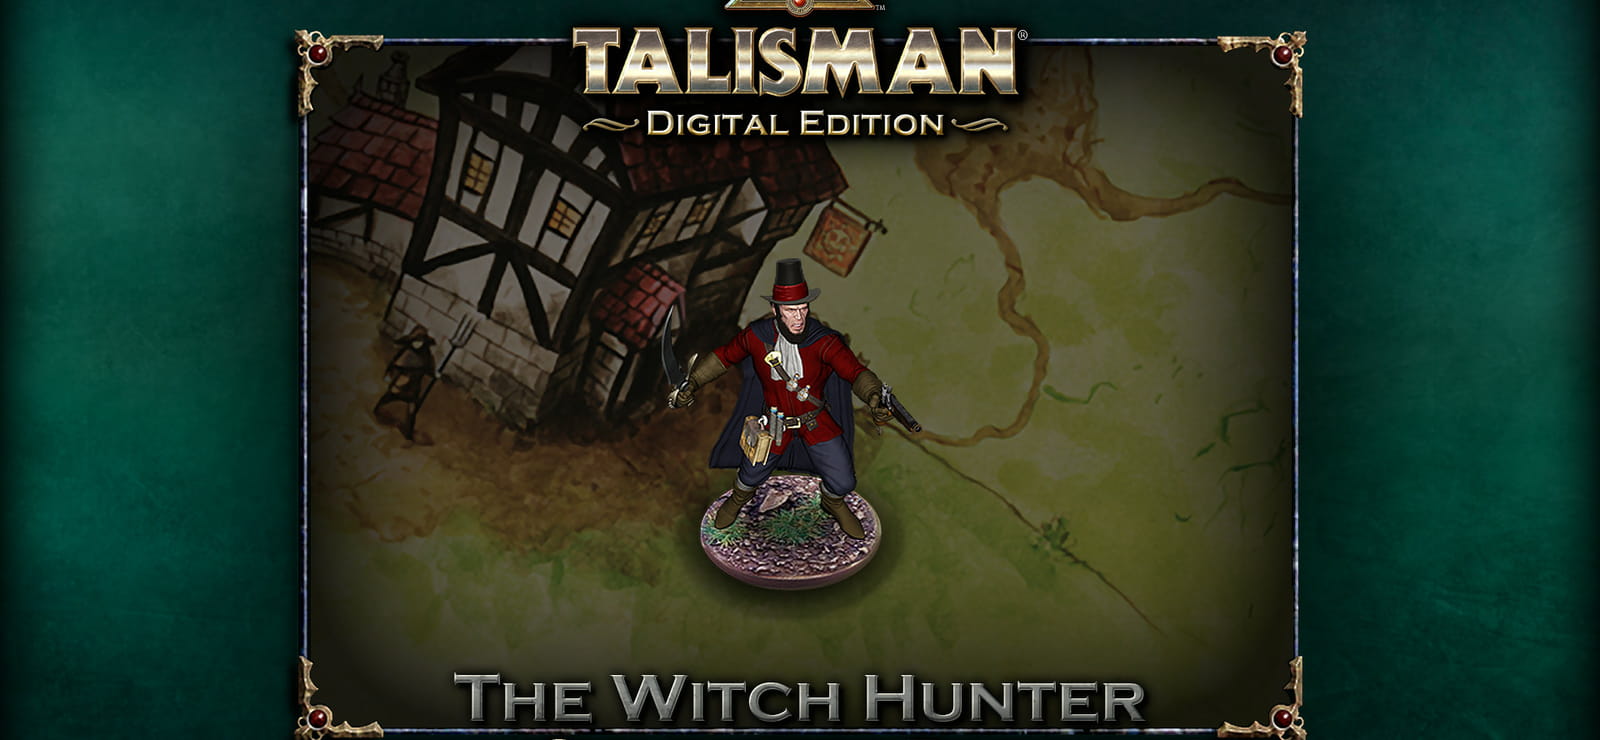 Talisman Character - Witch Hunter